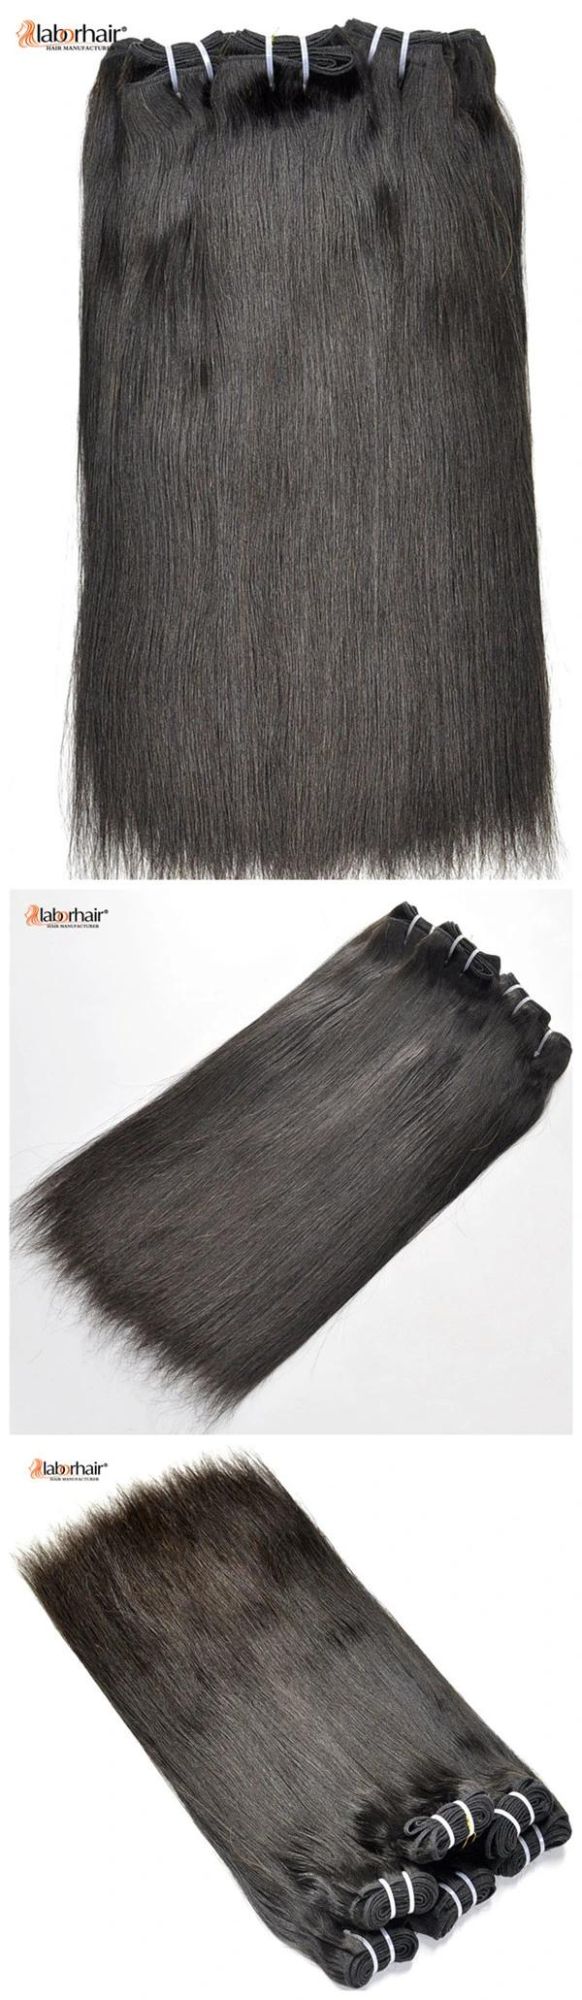 High Quality 10A Unprocessed Remy Virgin Brazilian Human Hair Extension